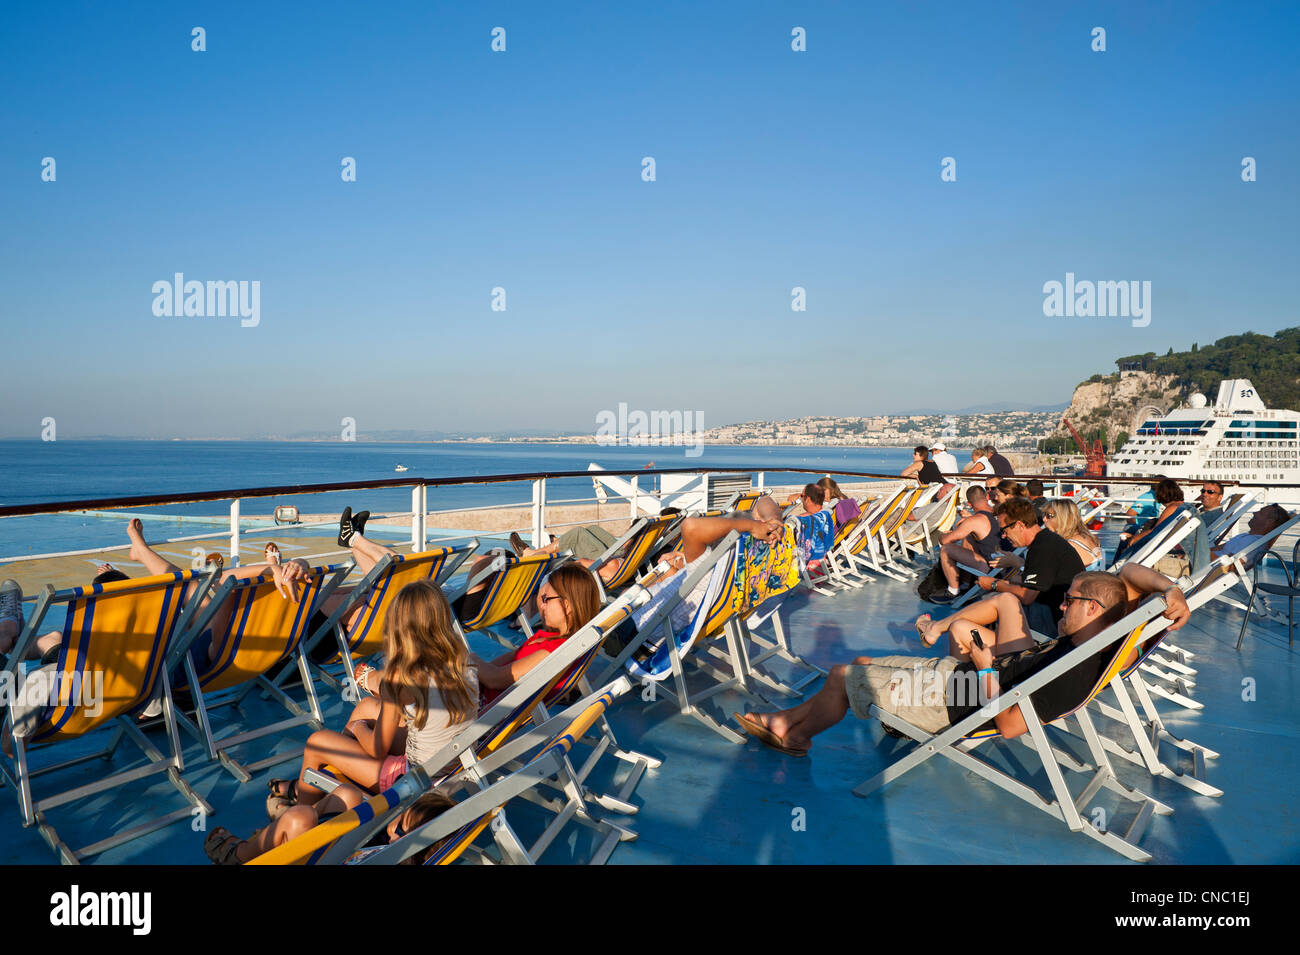 France, Alpes Maritimes, Nice, on the ferry of Corsica Ferries to Corsica from Nice Stock Photo